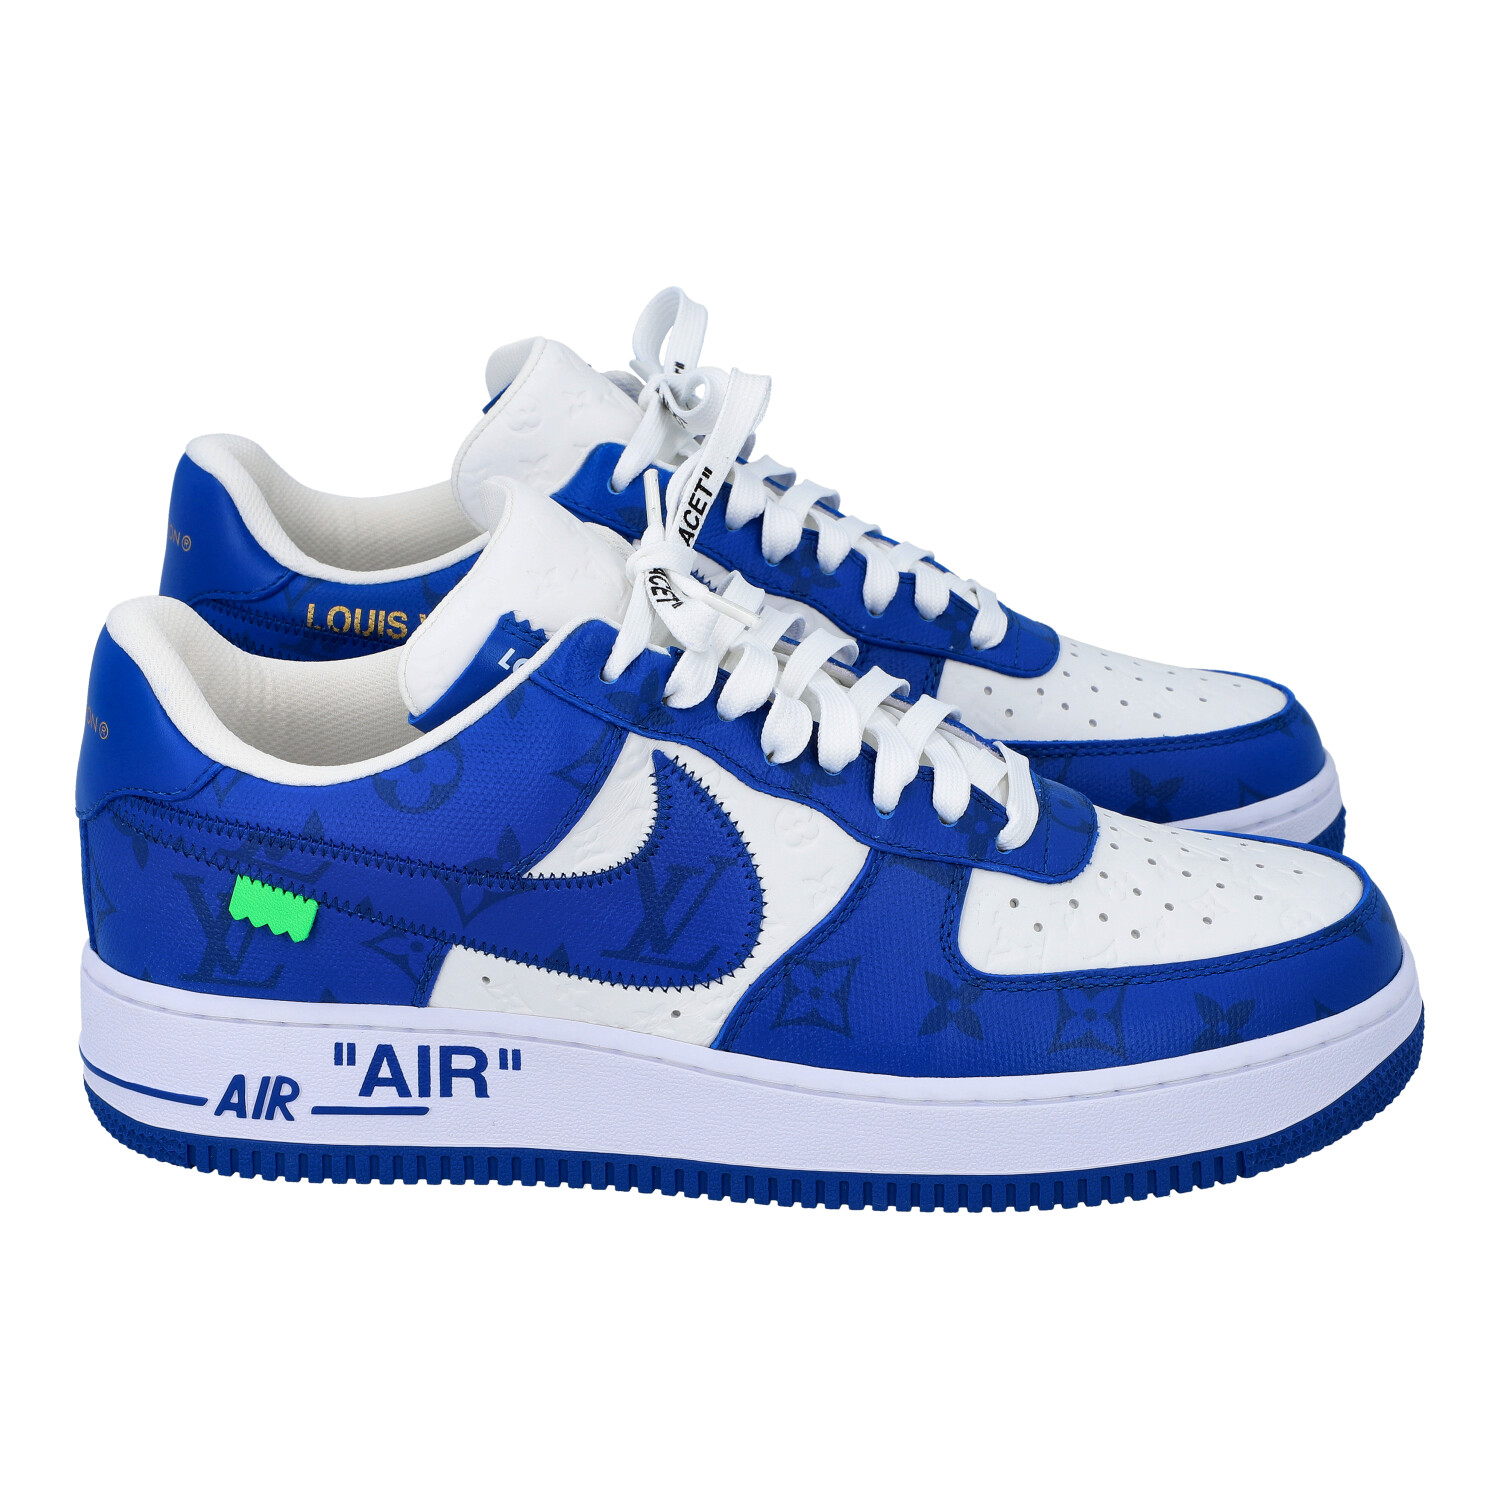 LOUIS VUITTON x NIKE Sneakers "AIR FORCE 1", Gr. 9. - Image 2 of 10